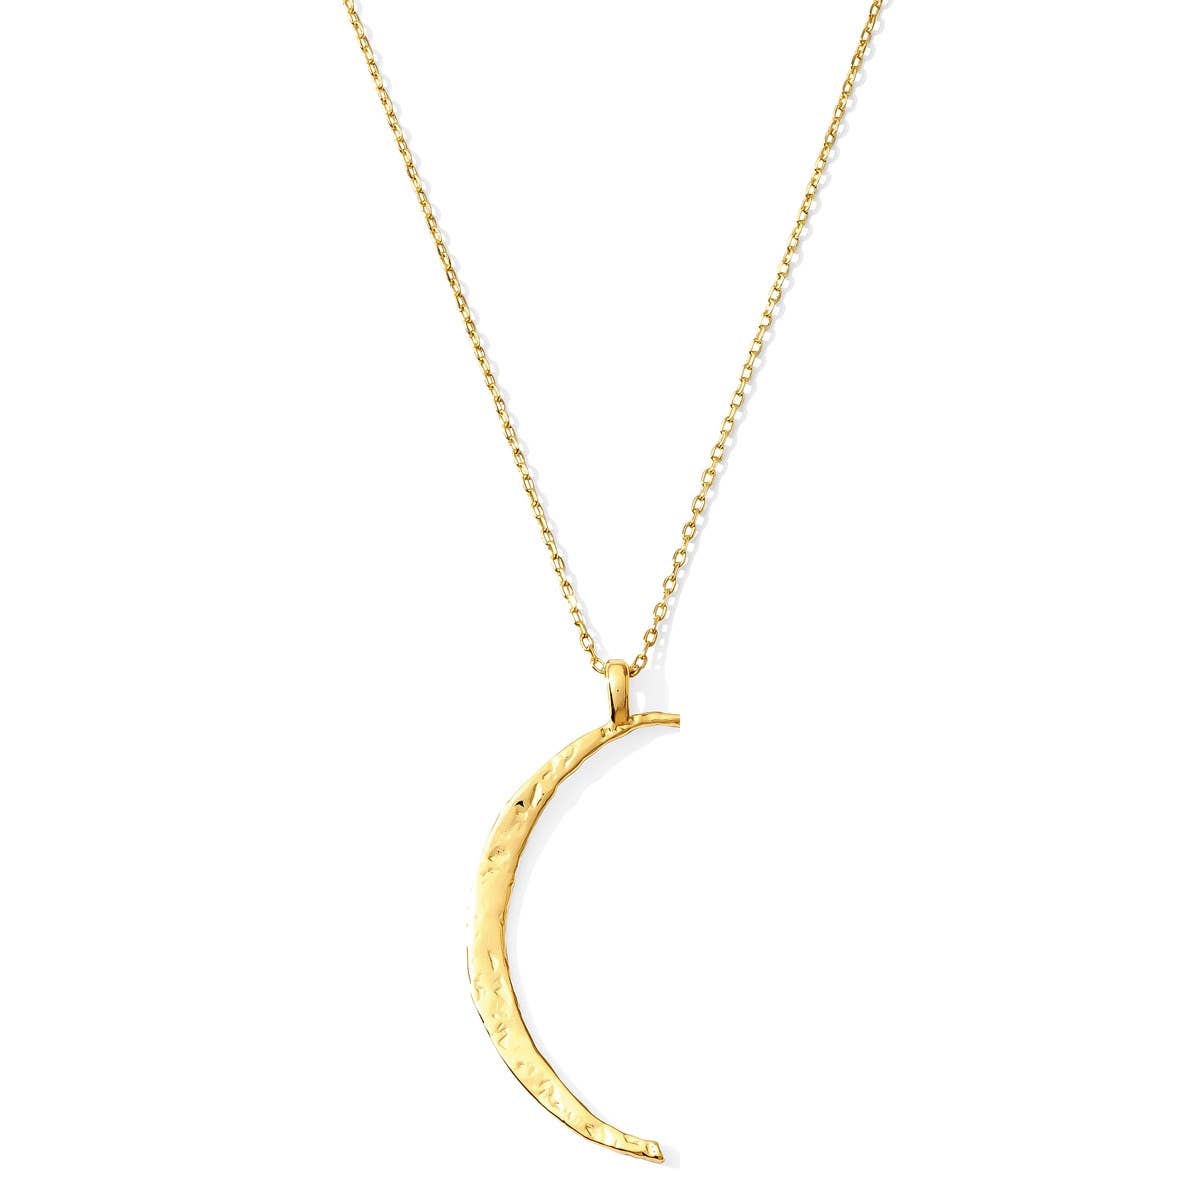 Gilded Moon Pendant Necklace